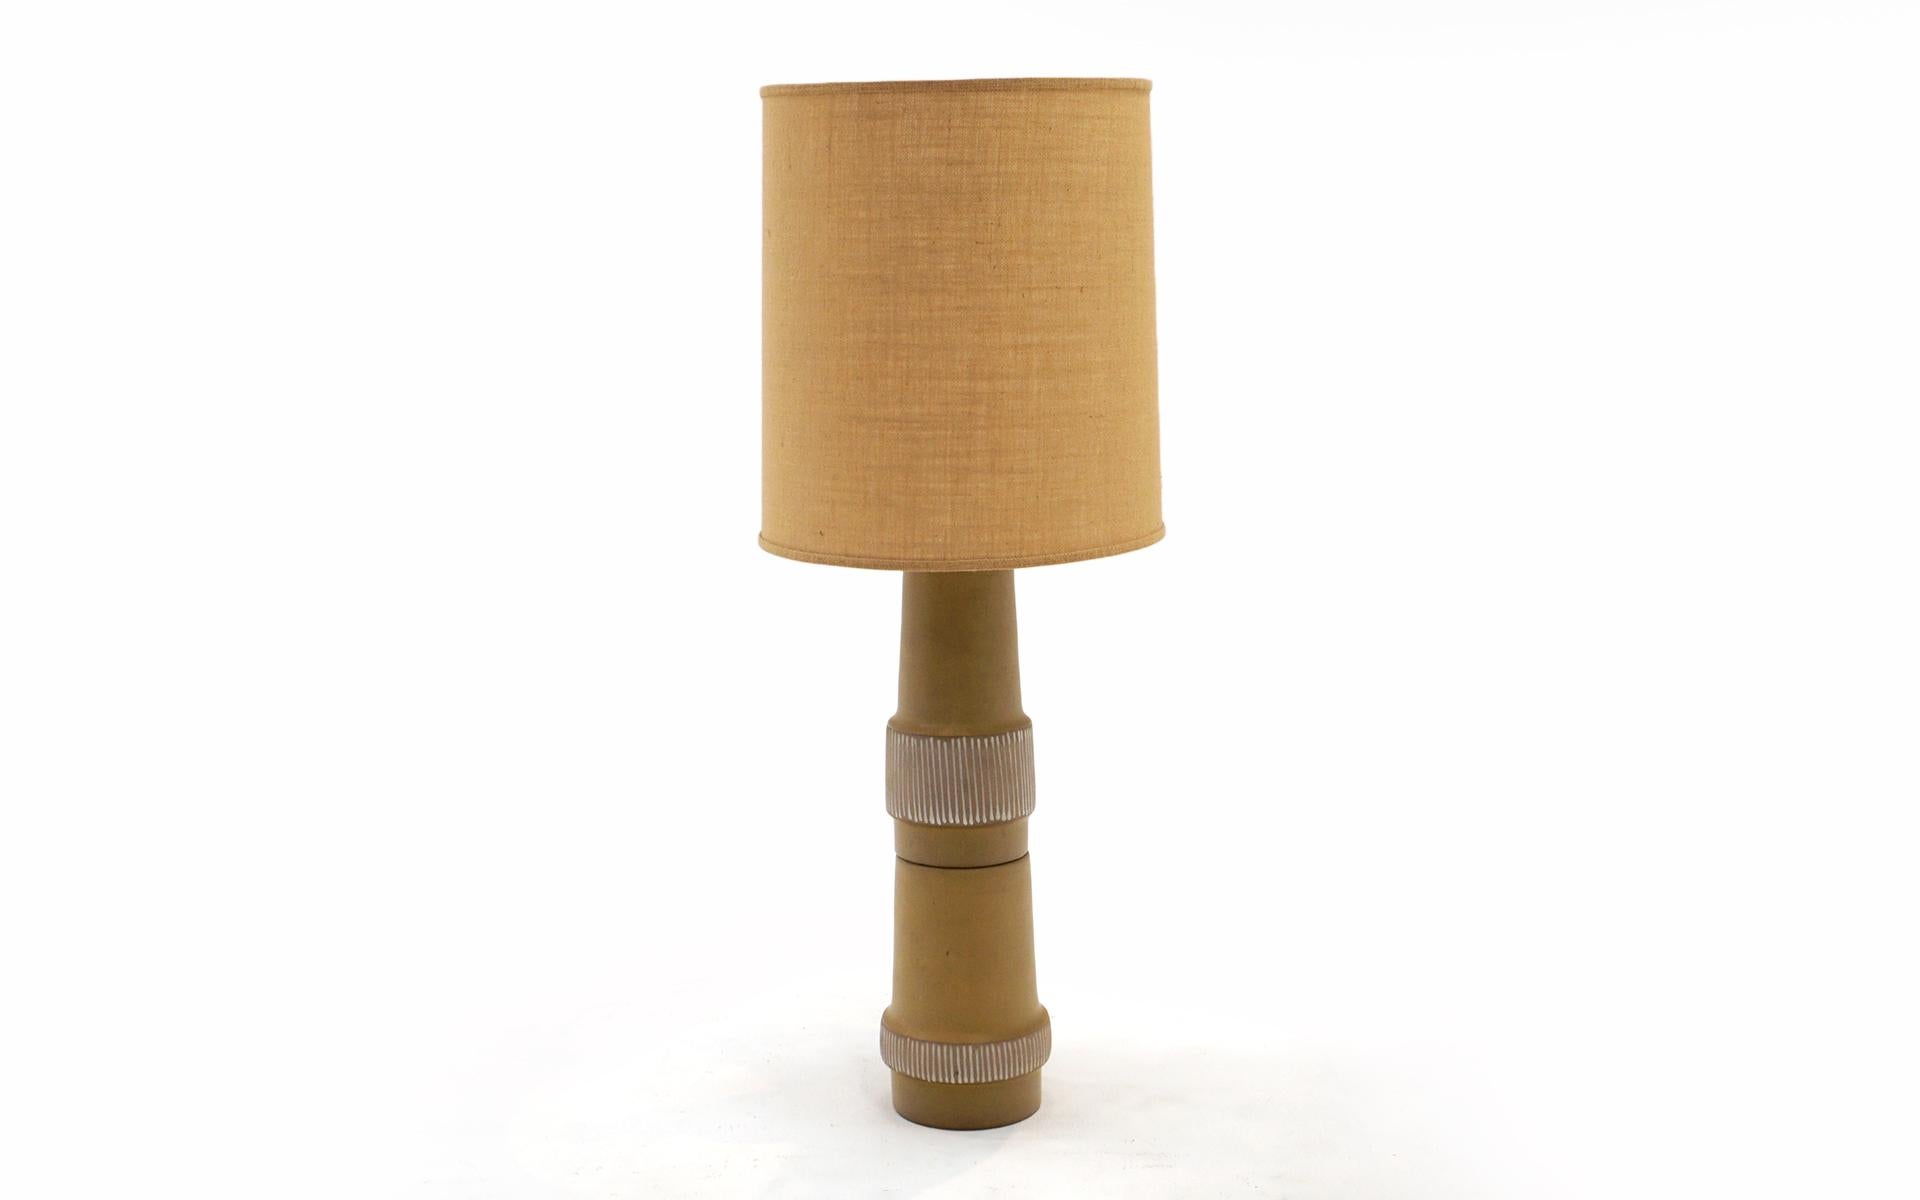 Large scale (almost four feet tall) ceramic table lamp designed by Gordon and Jane Martz for Marshall Studios. Colors are tan and white with sgraffito decoration. This fine and rare example retains the original shade and original walnut finial.